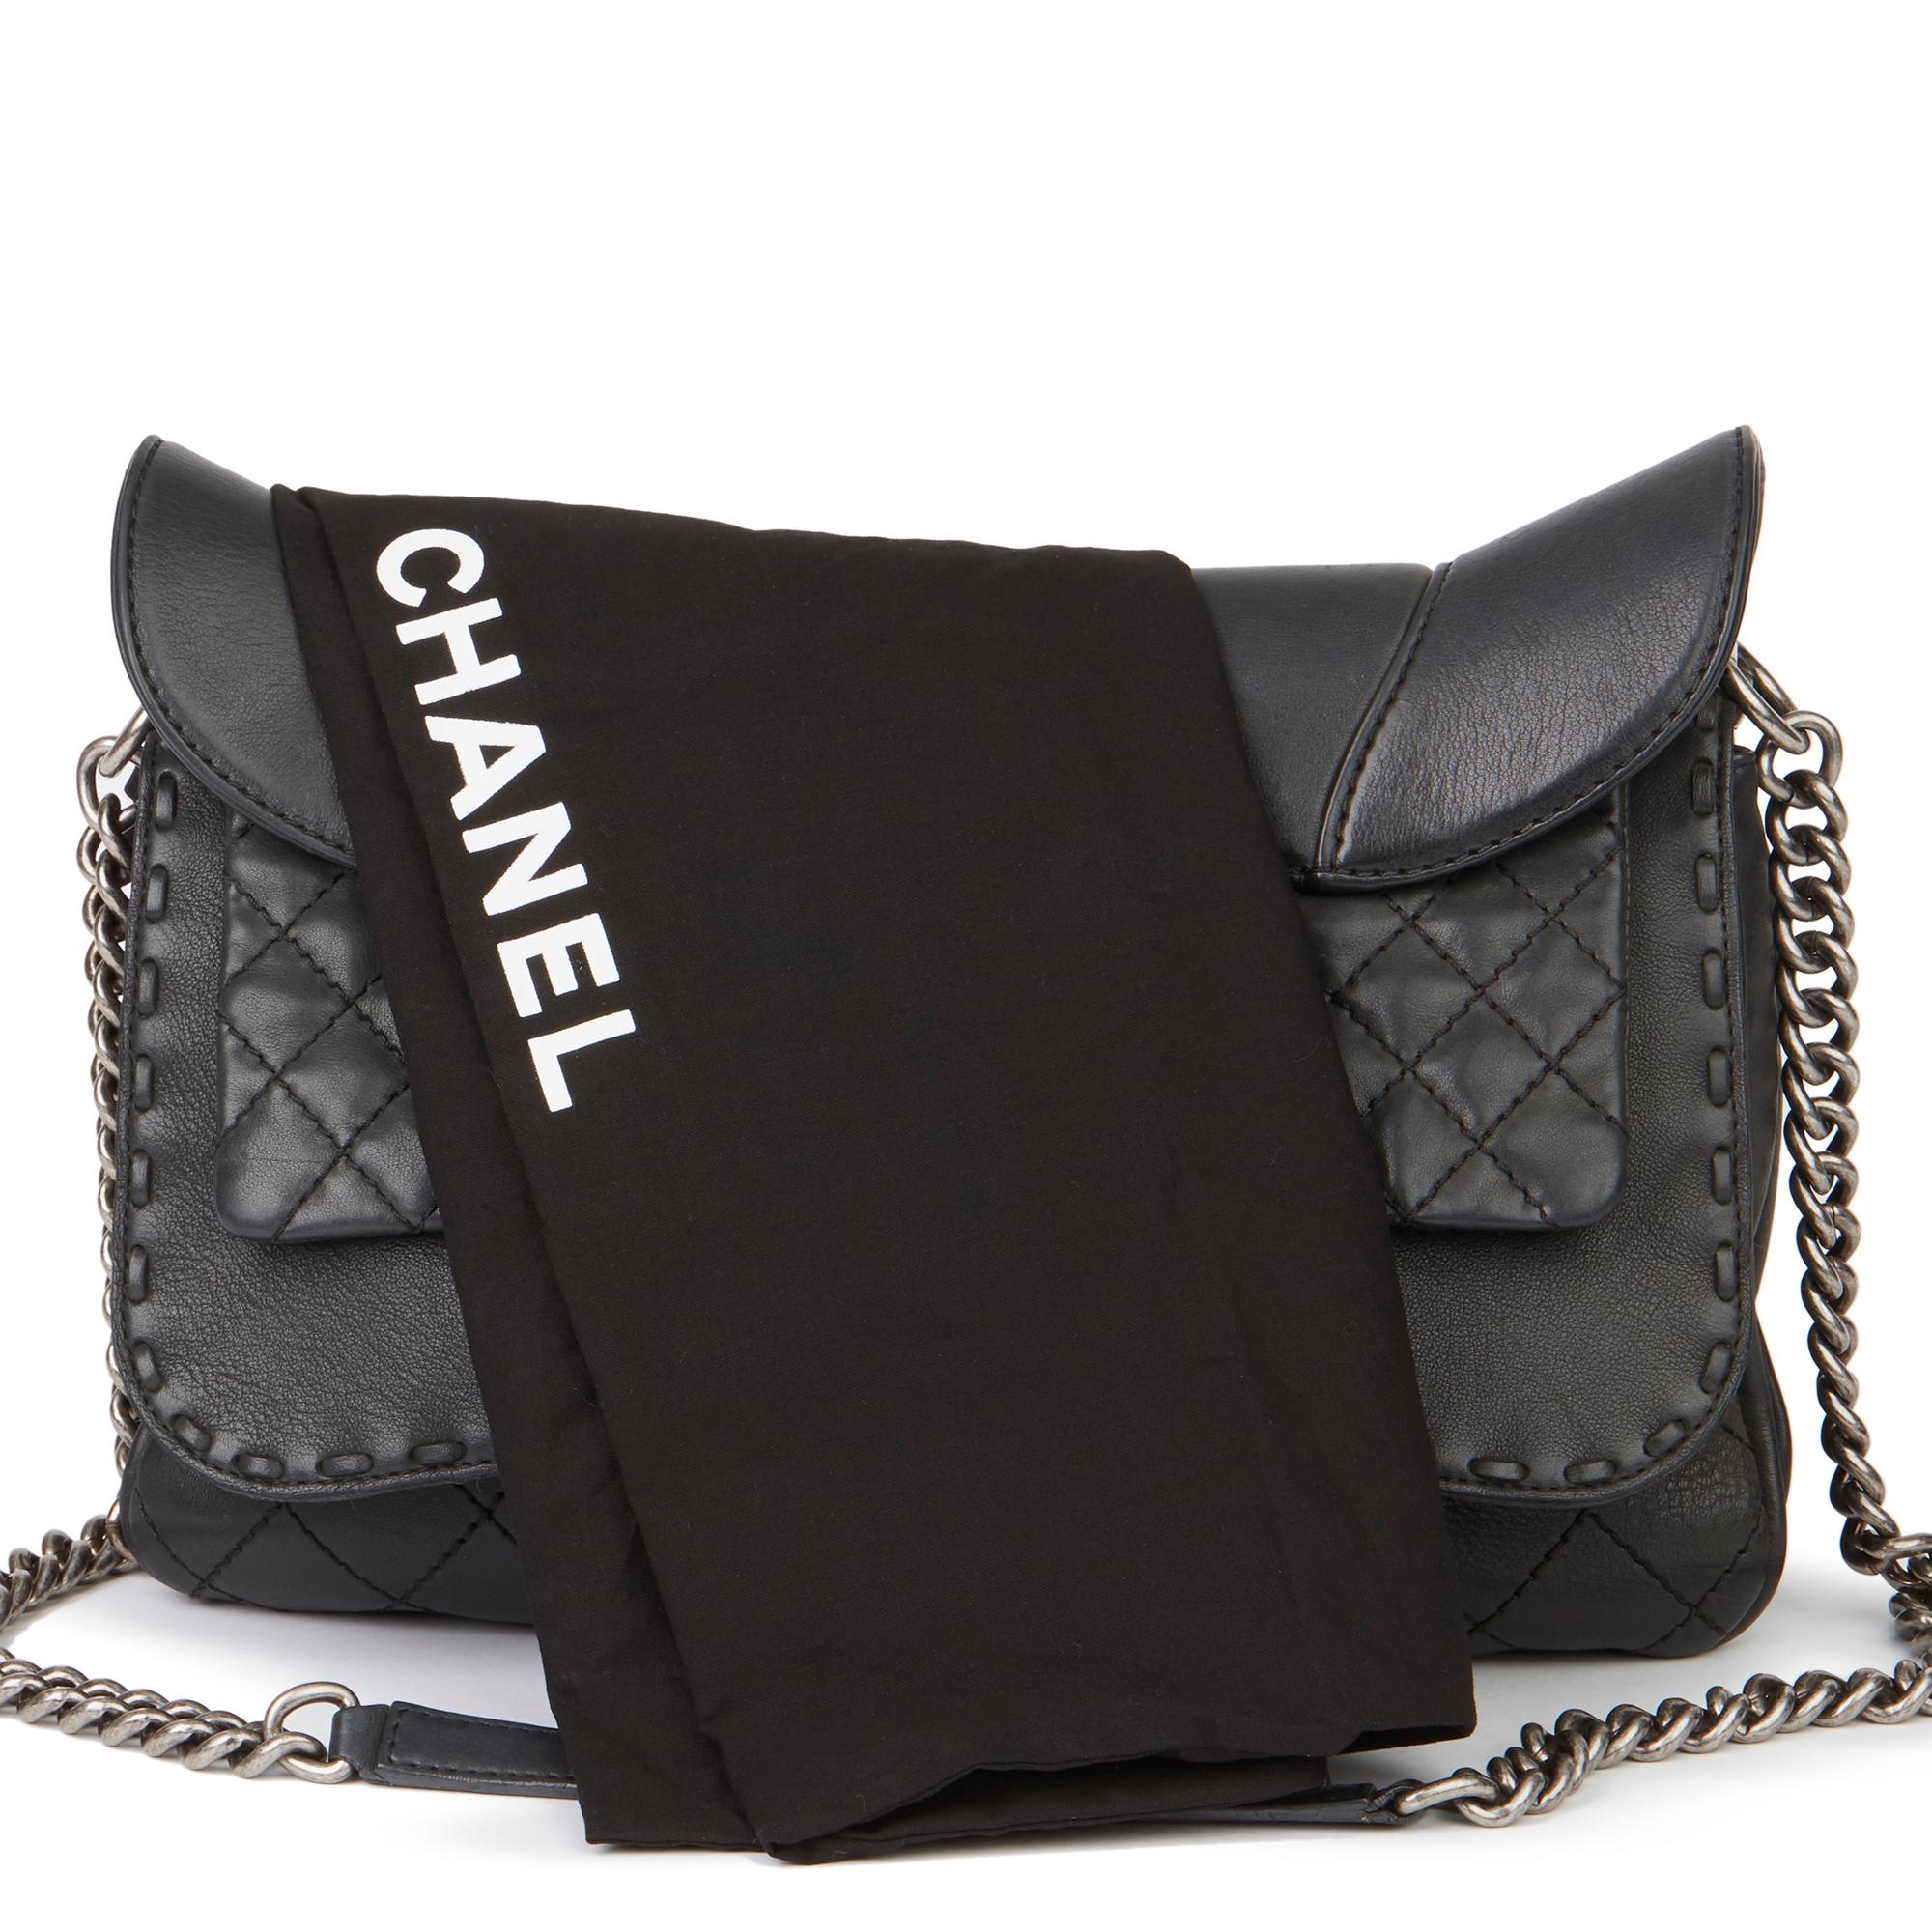 2014 Chanel Black Quilted Calfskin Leather Paris-Dallas Ride Western Saddle Bag 5